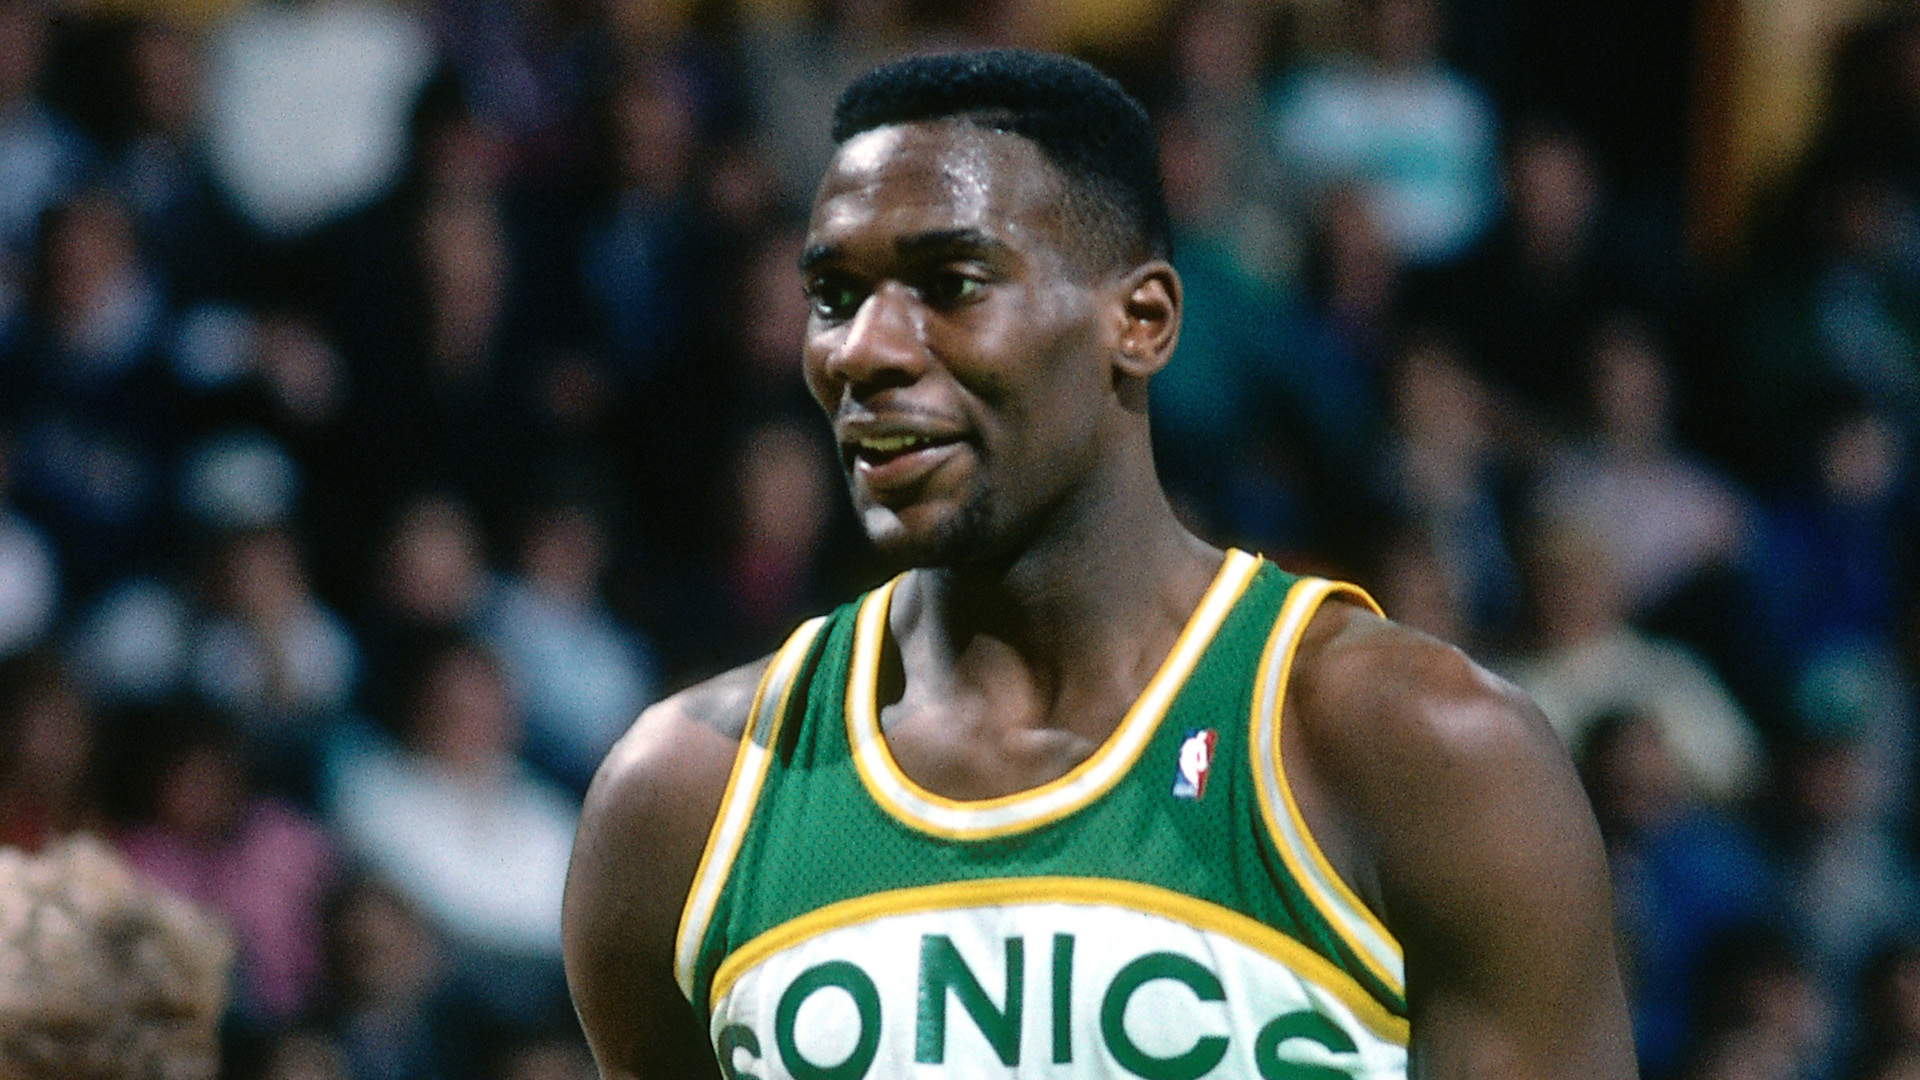 Shawn Kemp with one of the most disrespectful dunks in NBA history